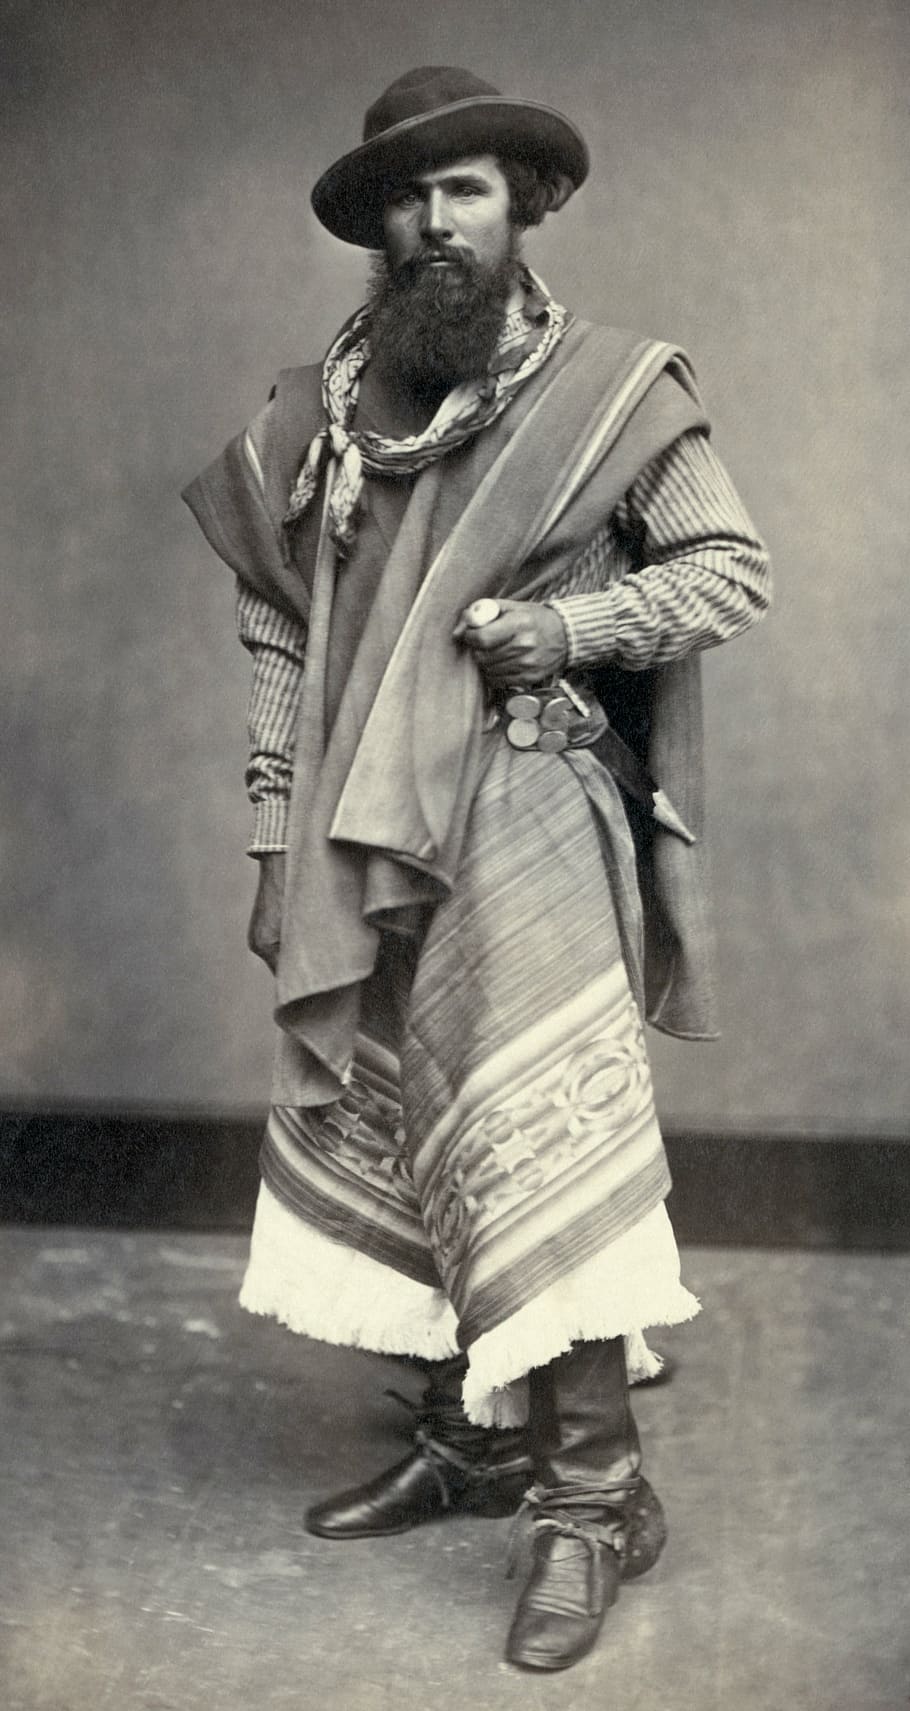 gaucho, indio, argentine, man, black and white, 1868, full length, clothing, one person, facial hair